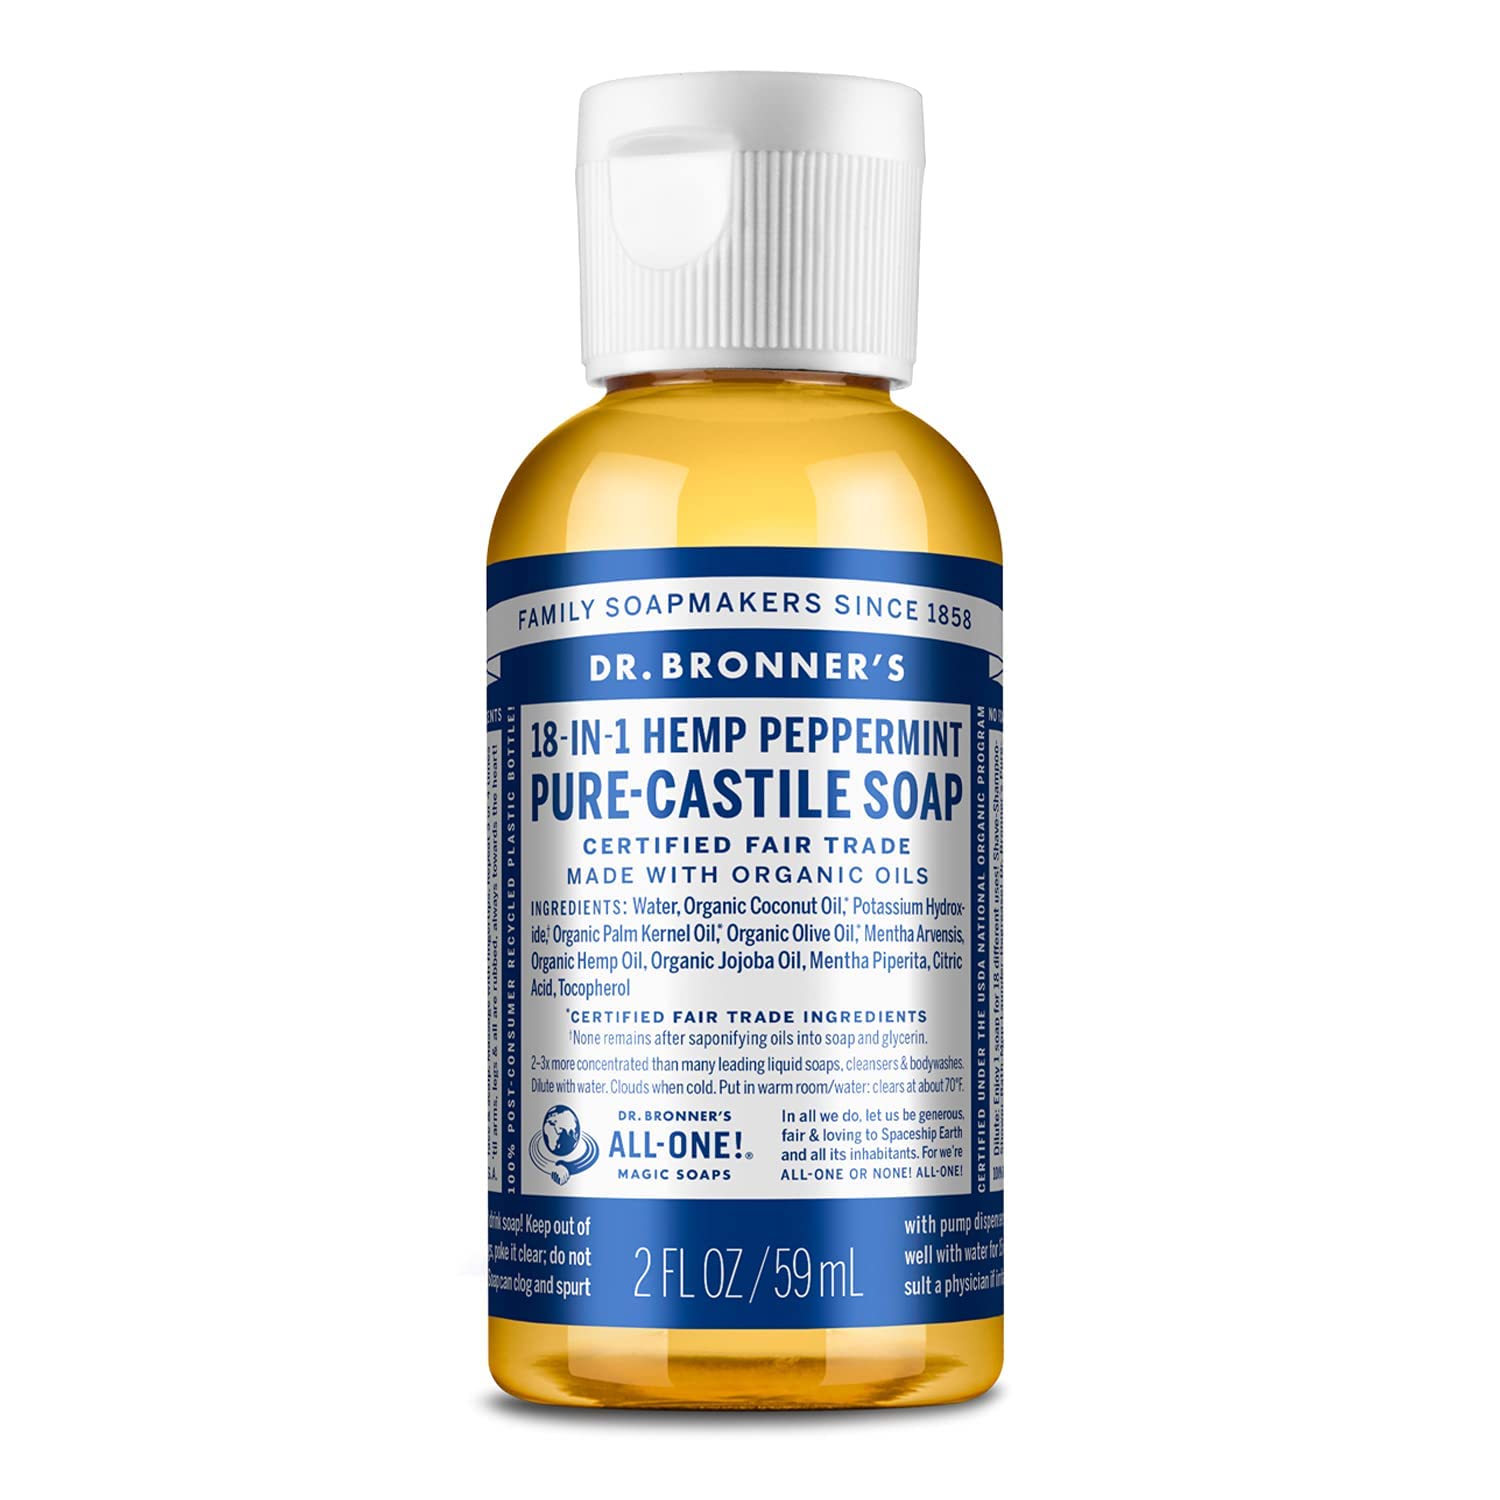 Dr. Bronner’s - Pure-Castile Liquid Soap (Peppermint, Travel Size, 2 ounce) - Made with Organic Oils, 18-in-1 Uses: Face, Body, Hair, Laundry, Pets and Dishes, Concentrated, Vegan, Non-GMO